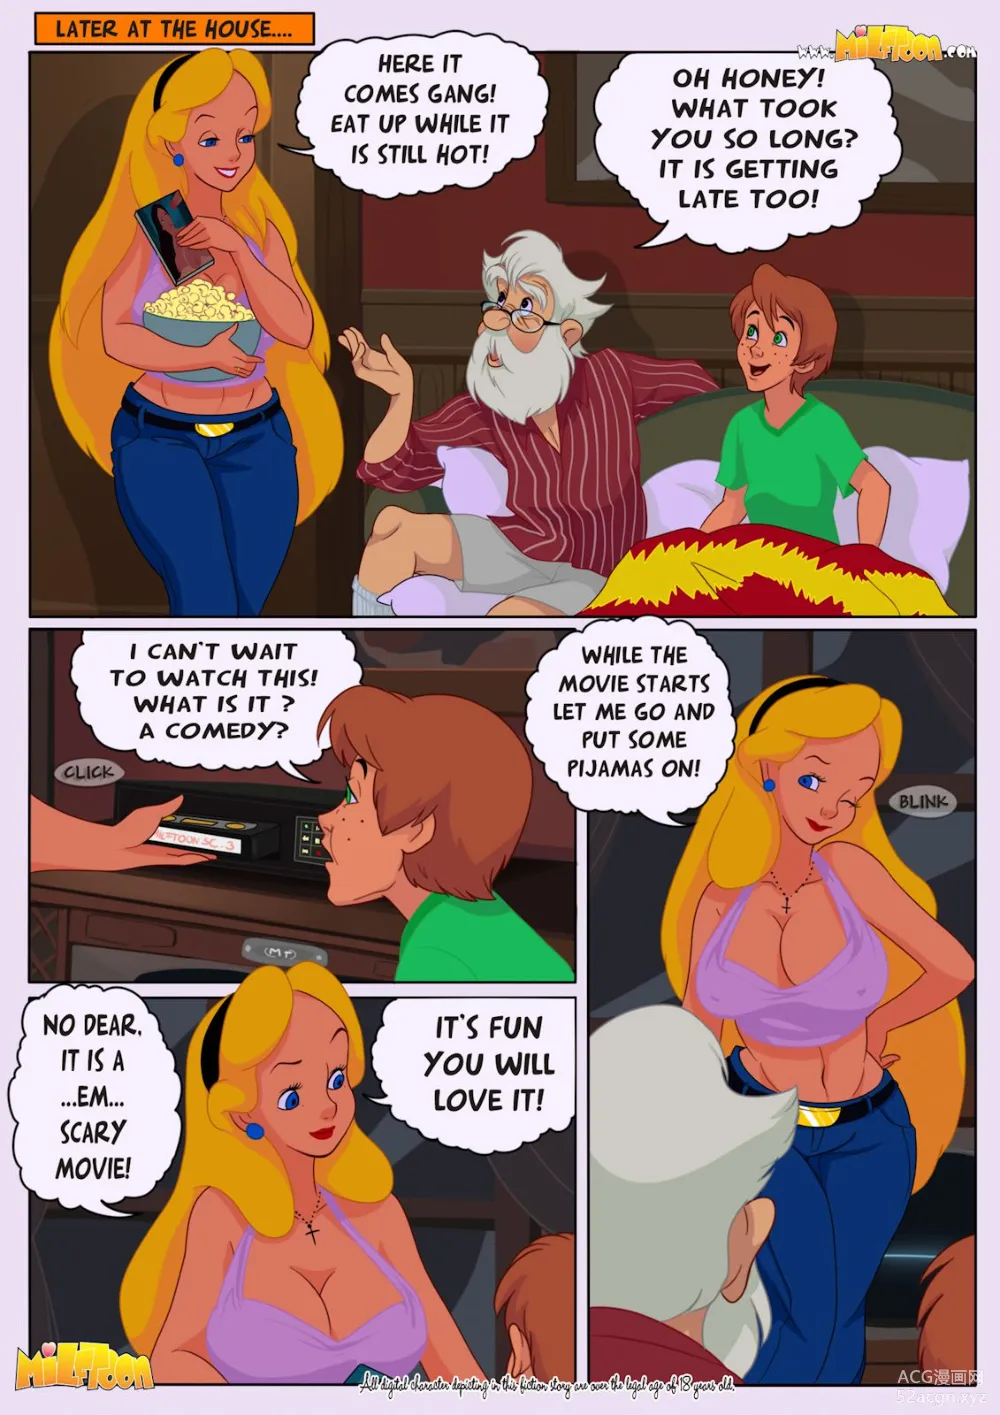 Who The Fuck Is Alice? - Chapter 1 (Alice in Wonderland) - Western Porn  Comics Western Adult Comix